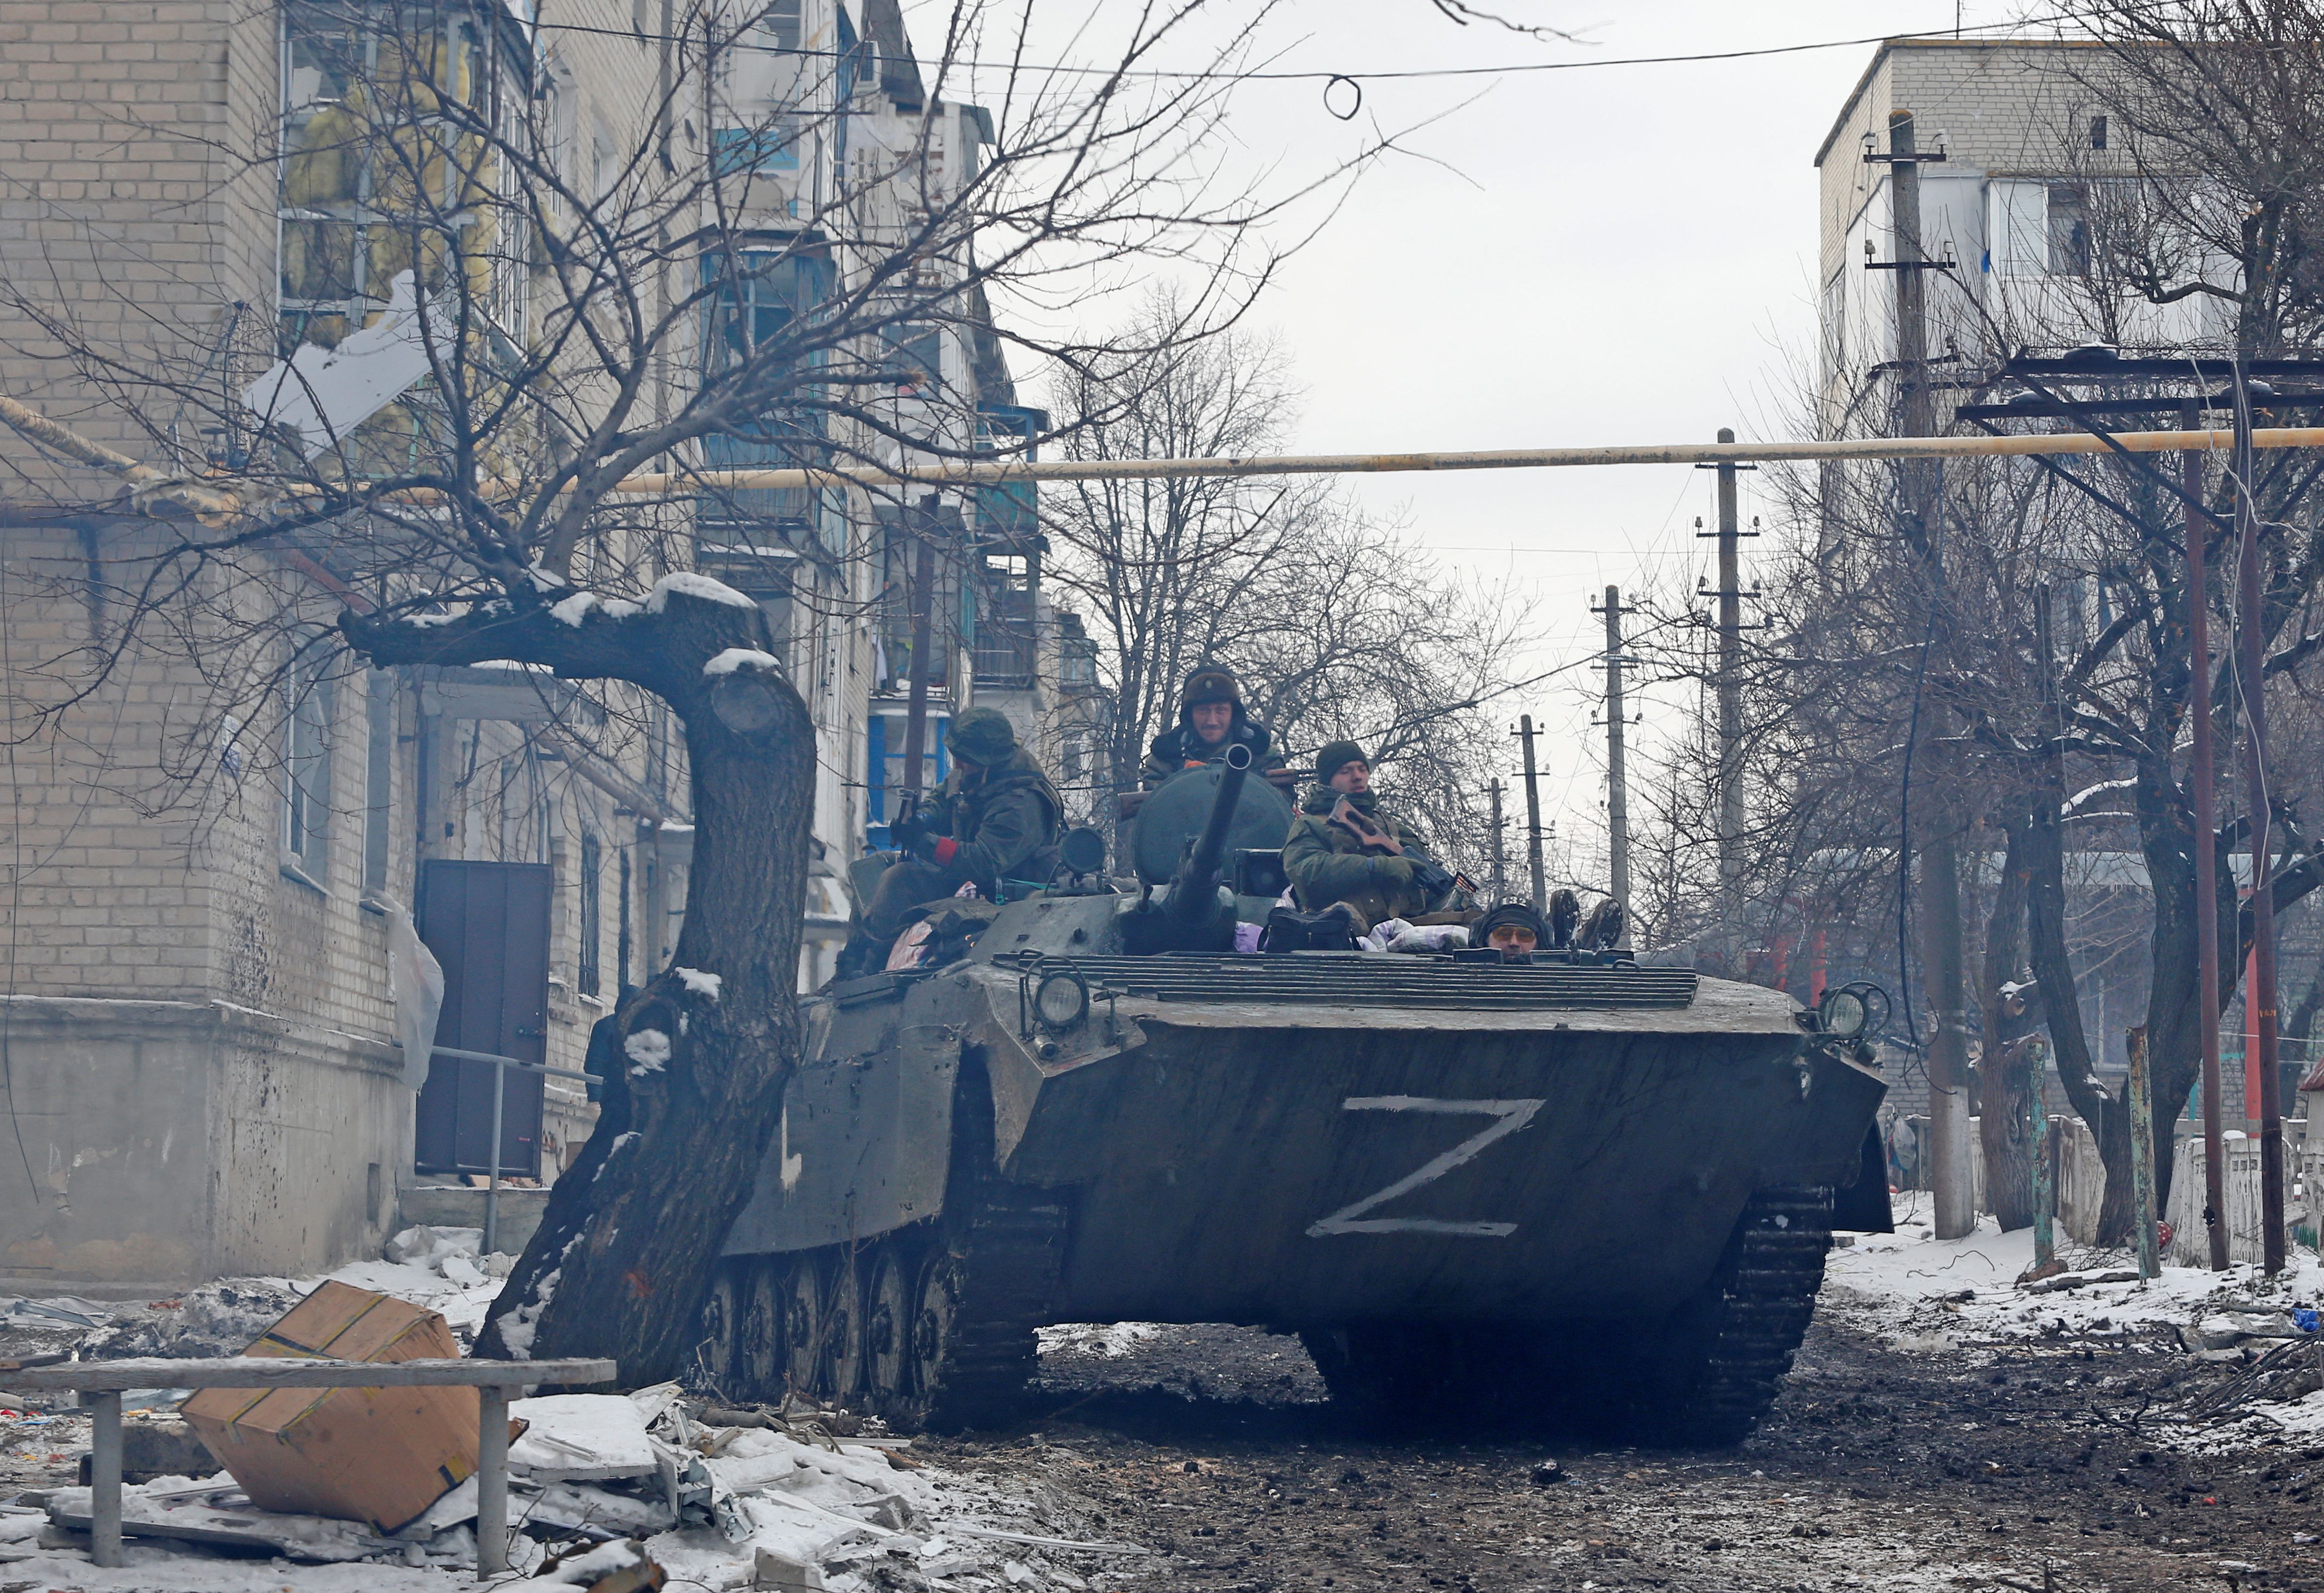 Service members of the pro-Russian troops in uniforms without insignia drive an armored car with the letters 